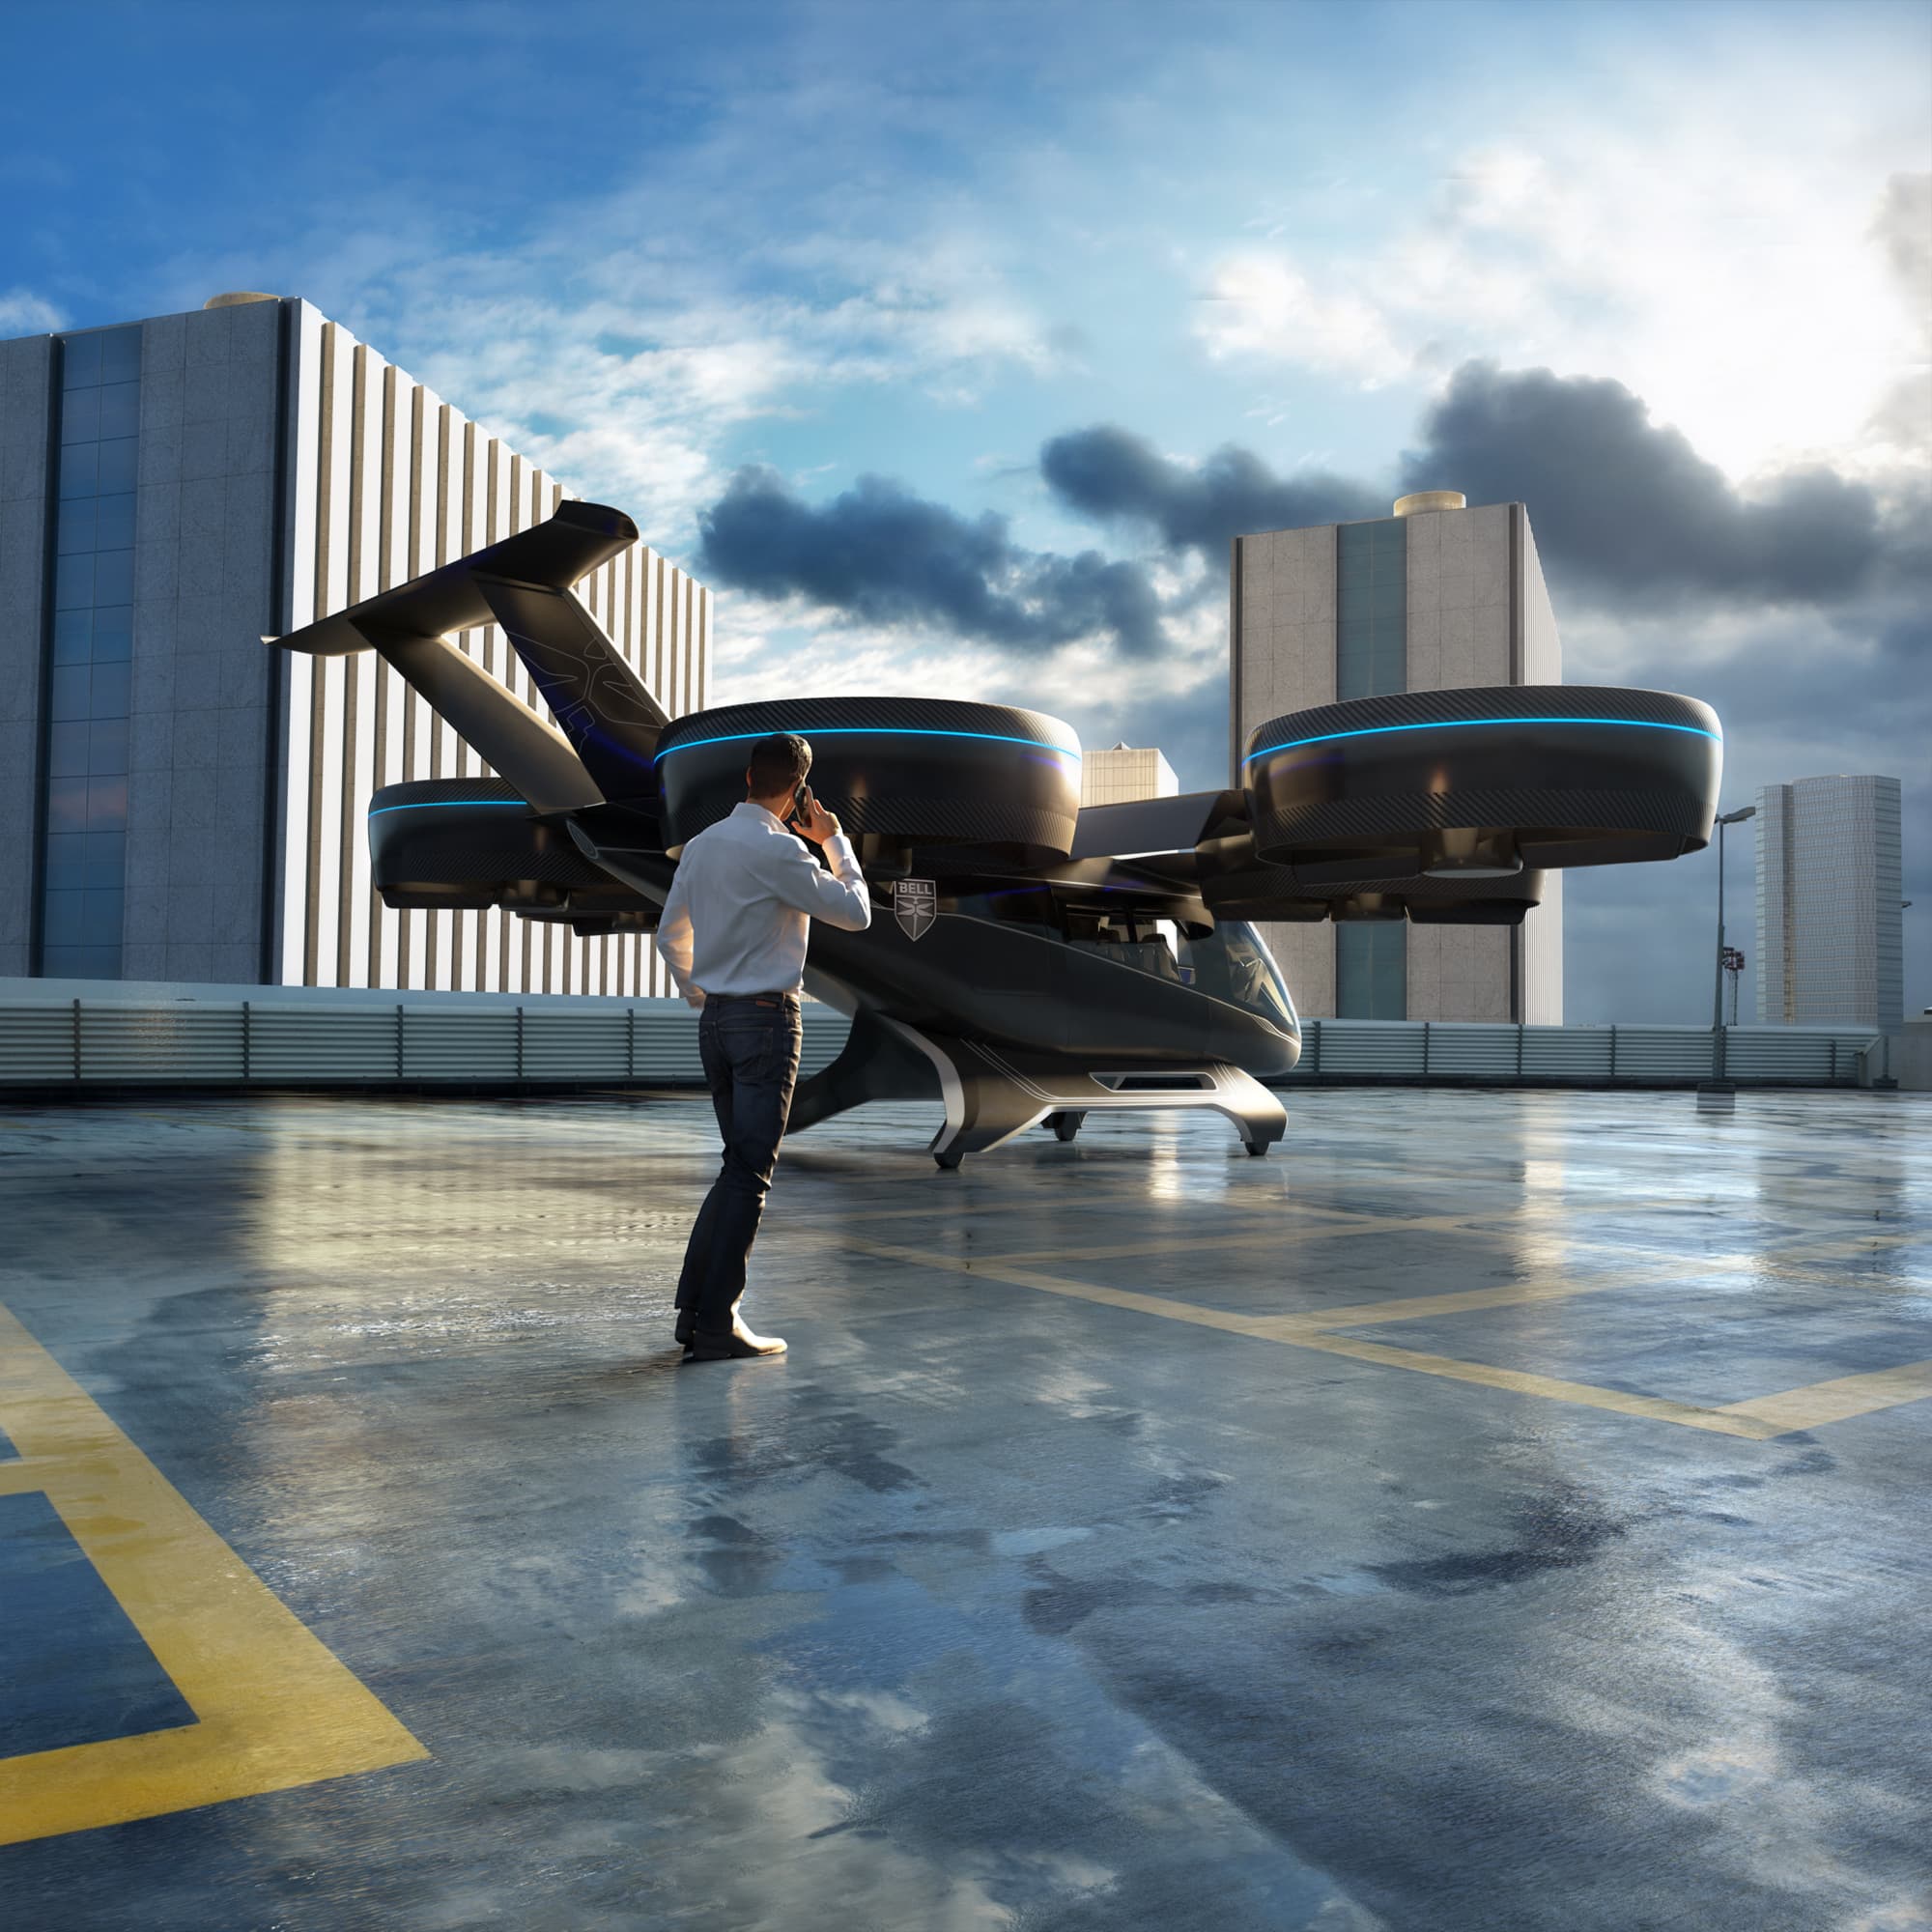 Bell_Flying Taxi_technosports.co.in